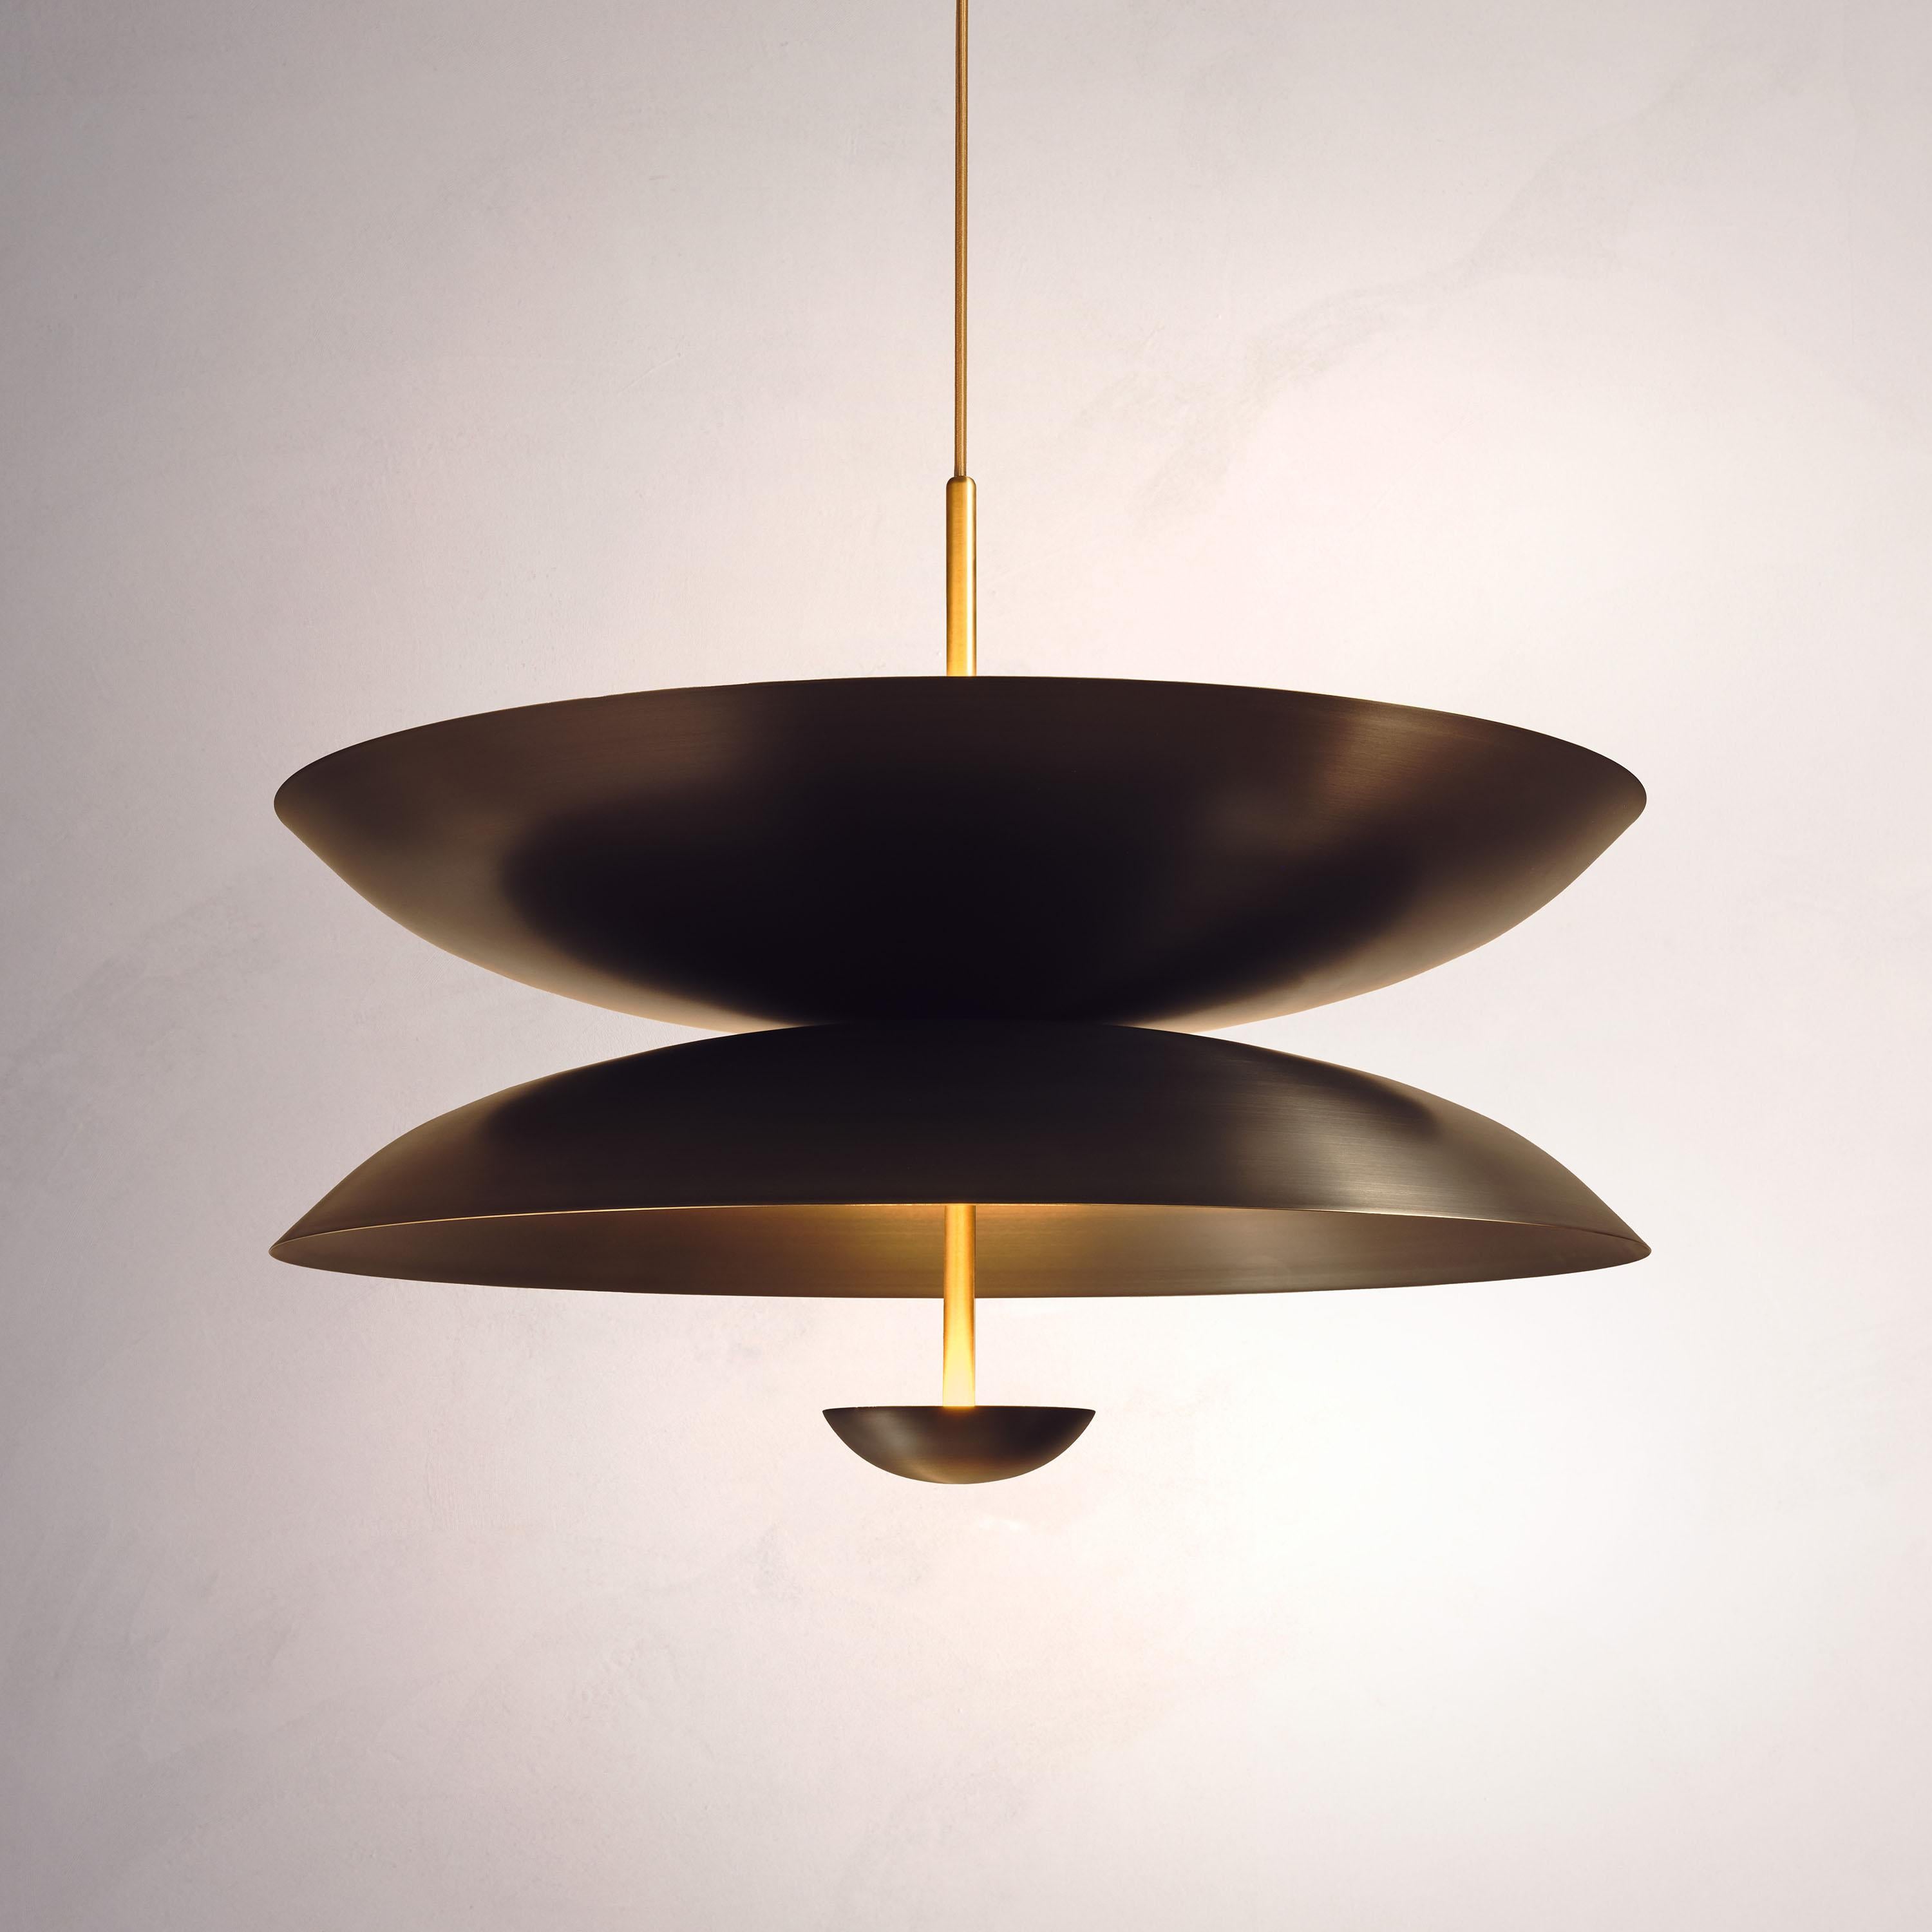 Inspired by planet-like shapes and textures, the Cosmic collection plays with both metal properties and a selection of patina finishes.
 
The Regolith Pendant is composed of two carefully hand-spun brass plates and finished in a mixed patina. One